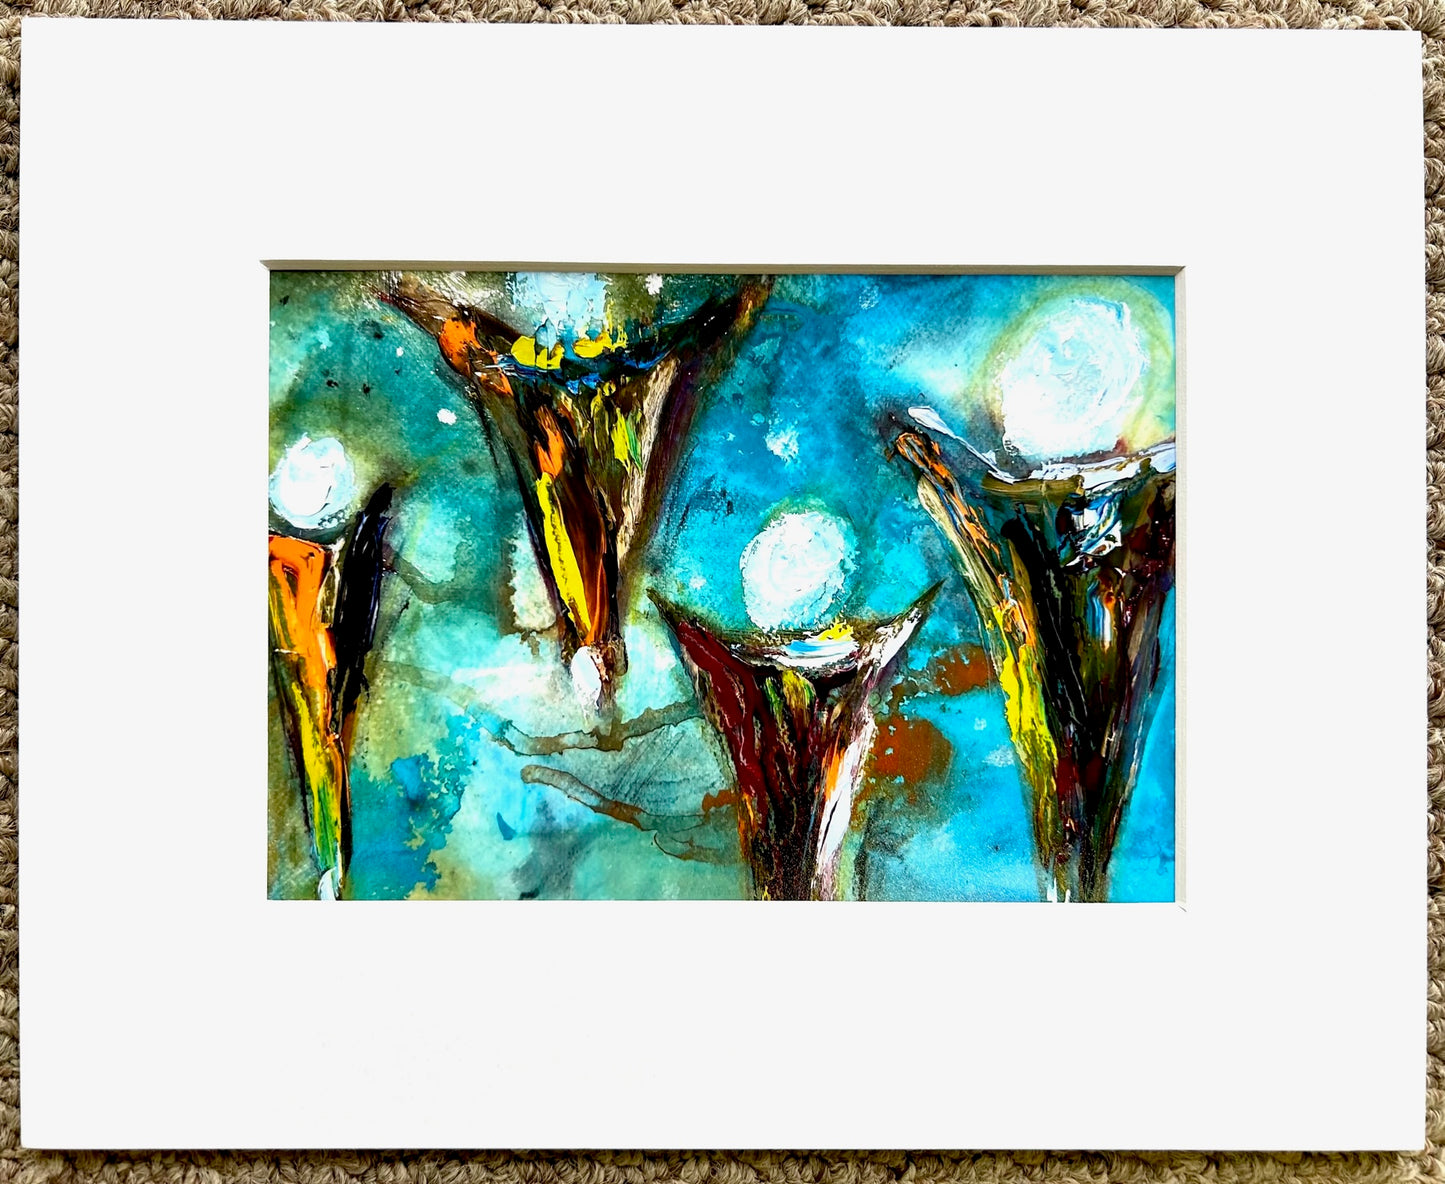 The Heavens Sing matted Giclee art print